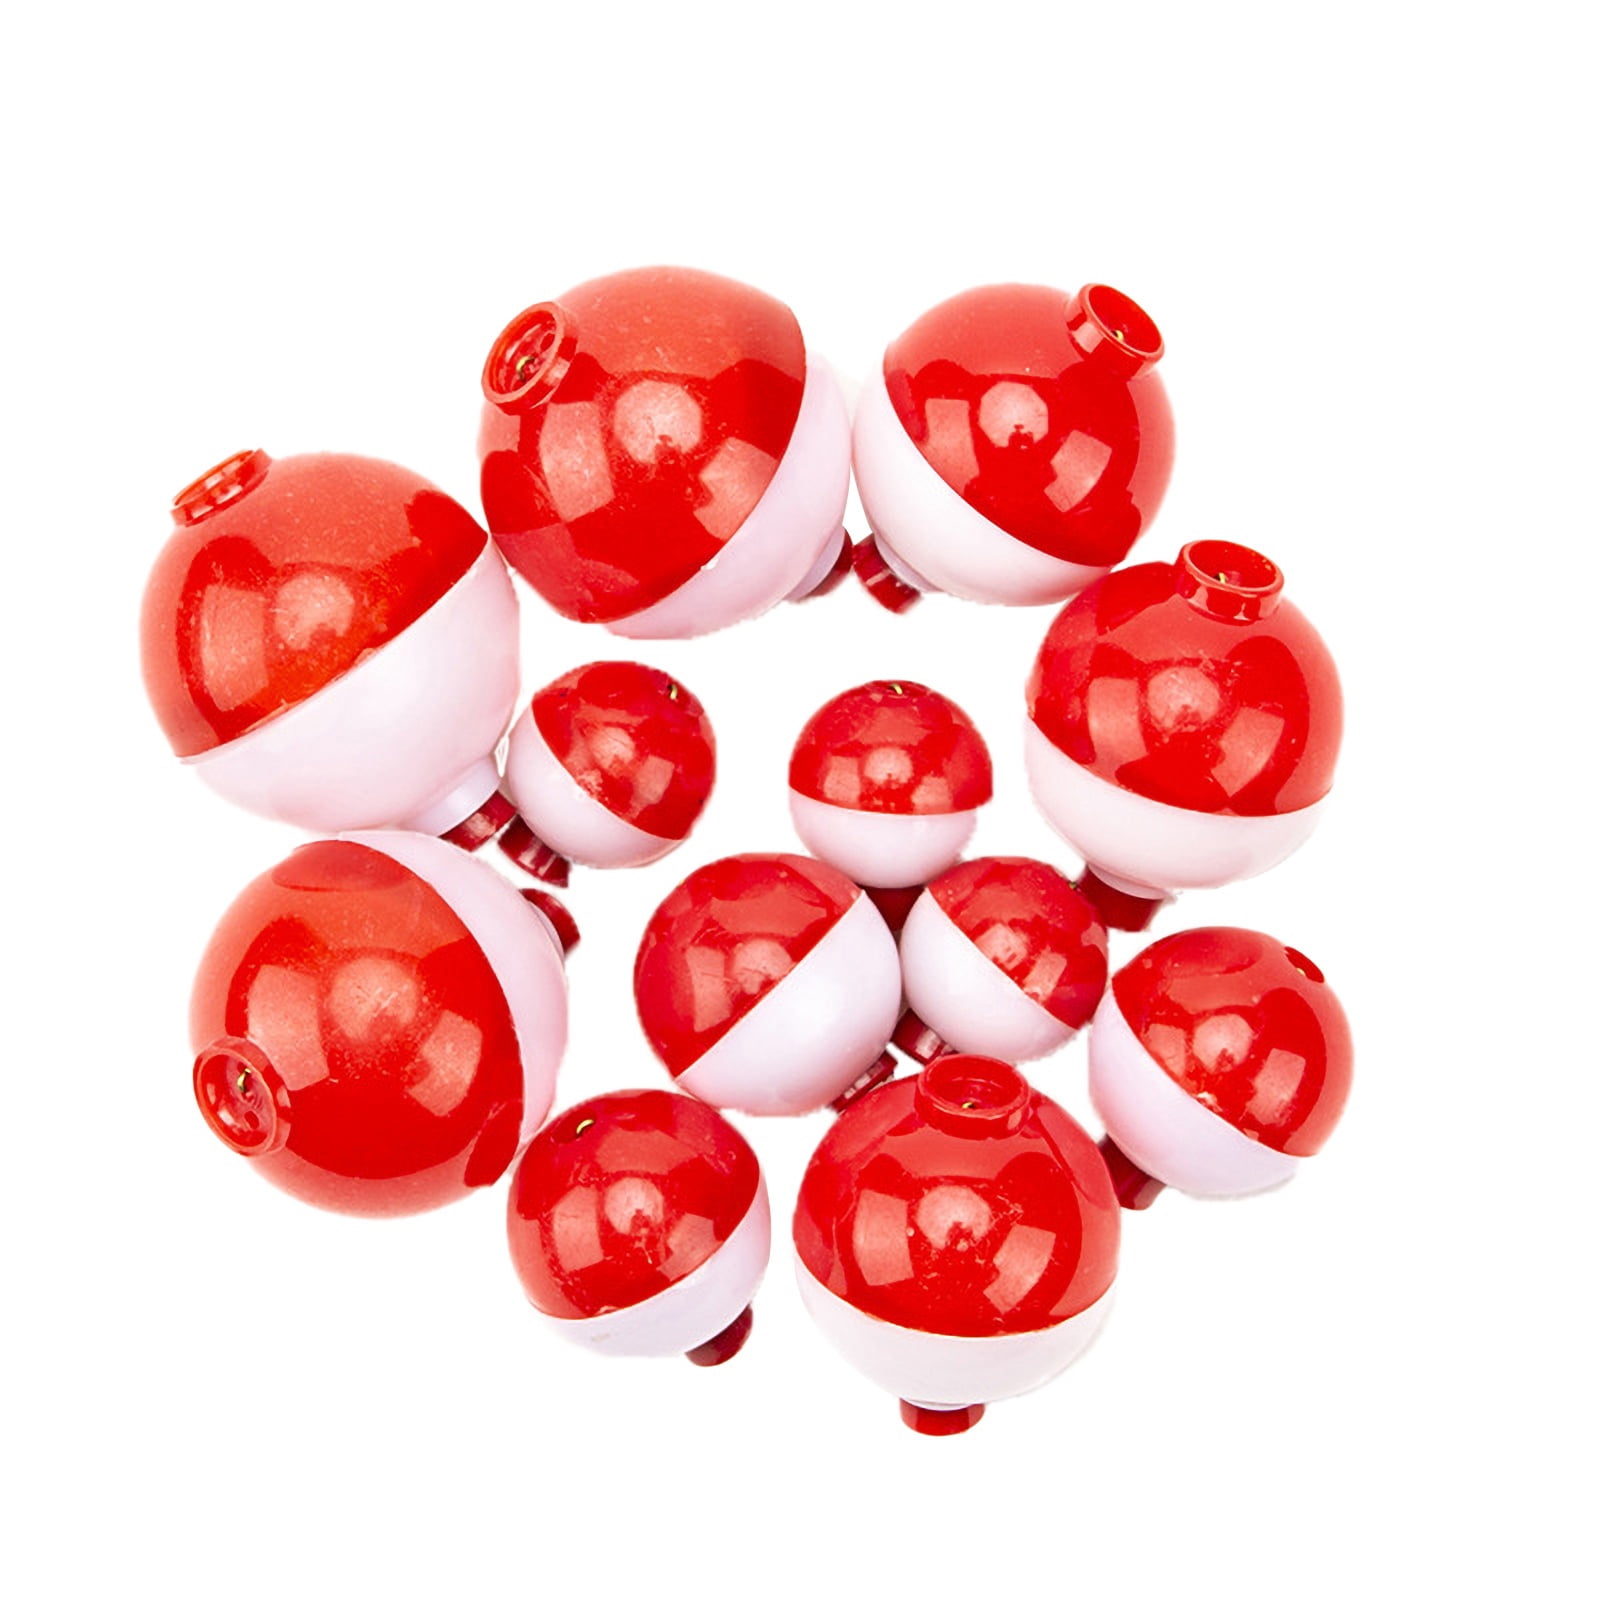 10 FISHING BOBBERS 3/4 Inch .75" Round Floats Red White SNAP ON FLOAT Bobber 